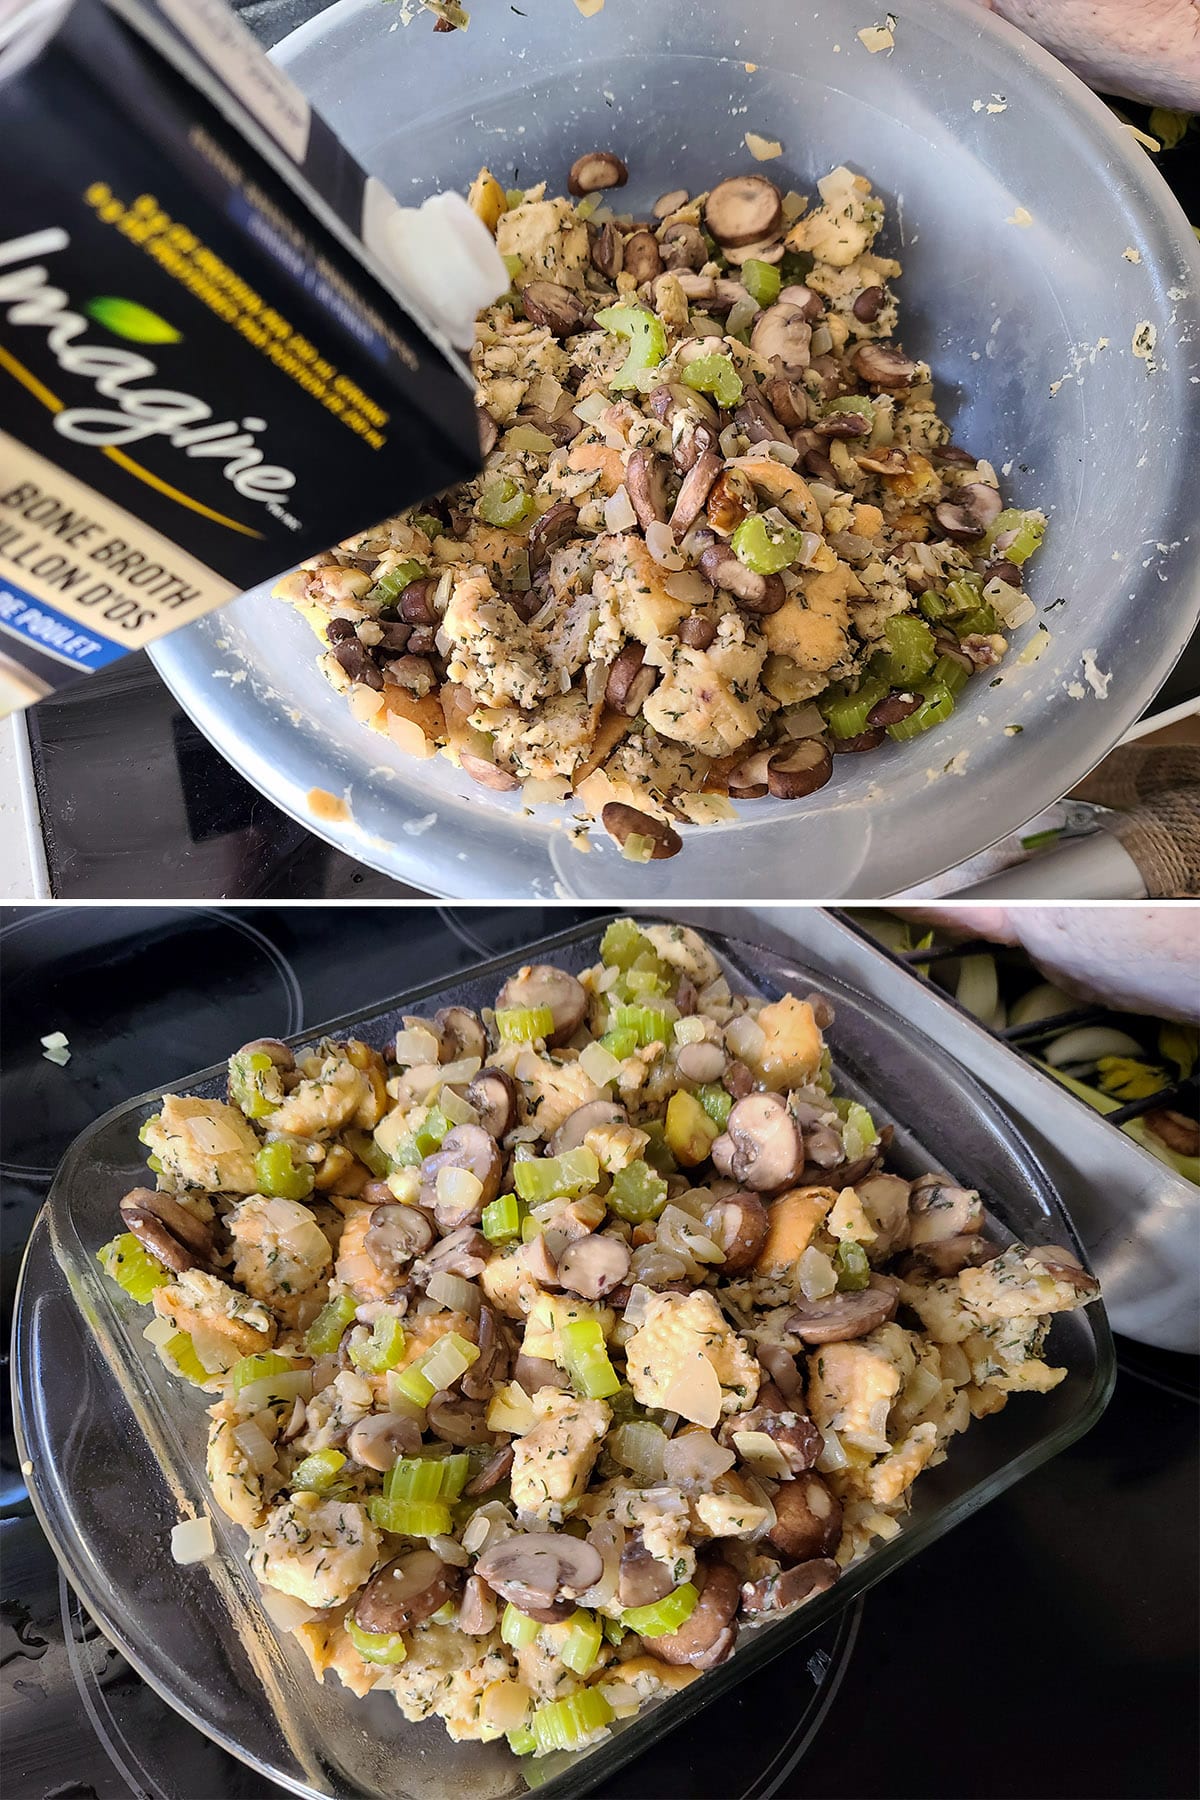 A 2 part image showing a bit of chicken broth being added to the remaining stuffing and that stuffing in a pan.